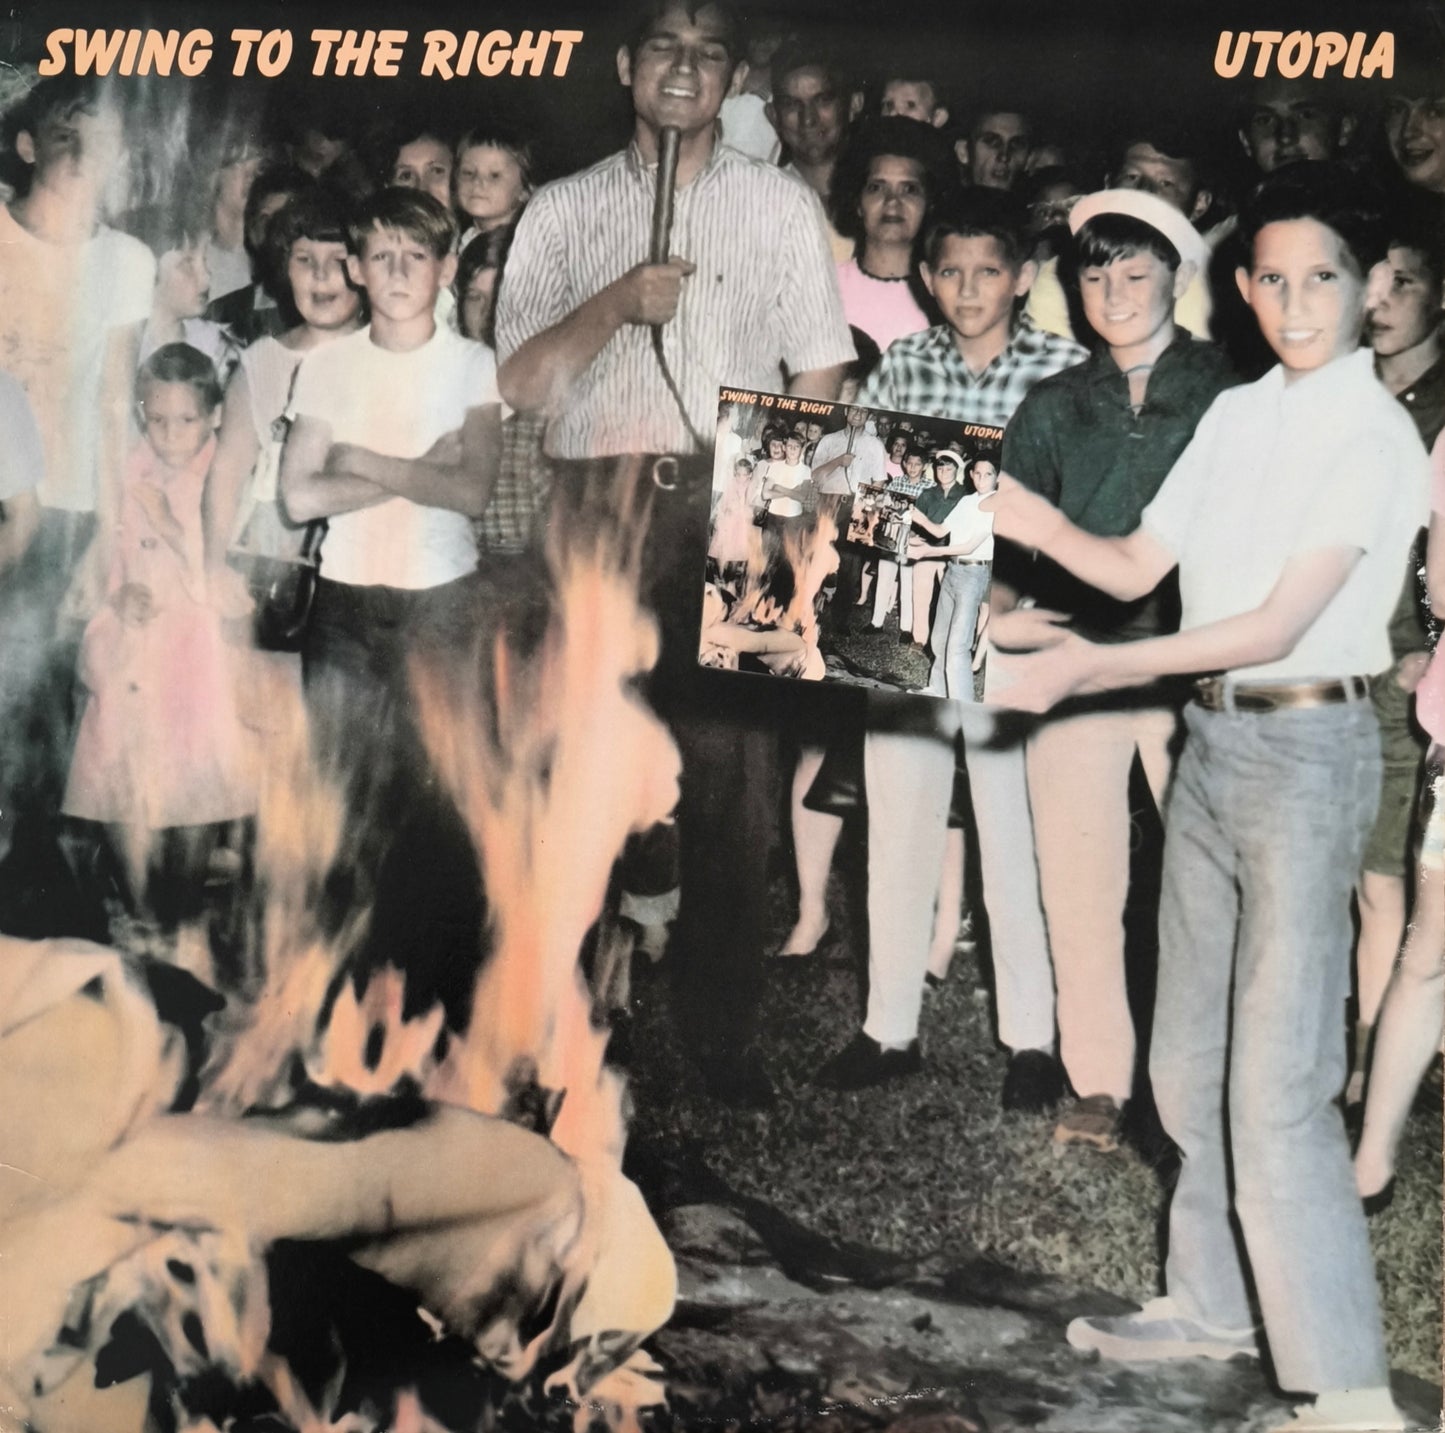 UTOPIA - Swing To The Right (presssage US)